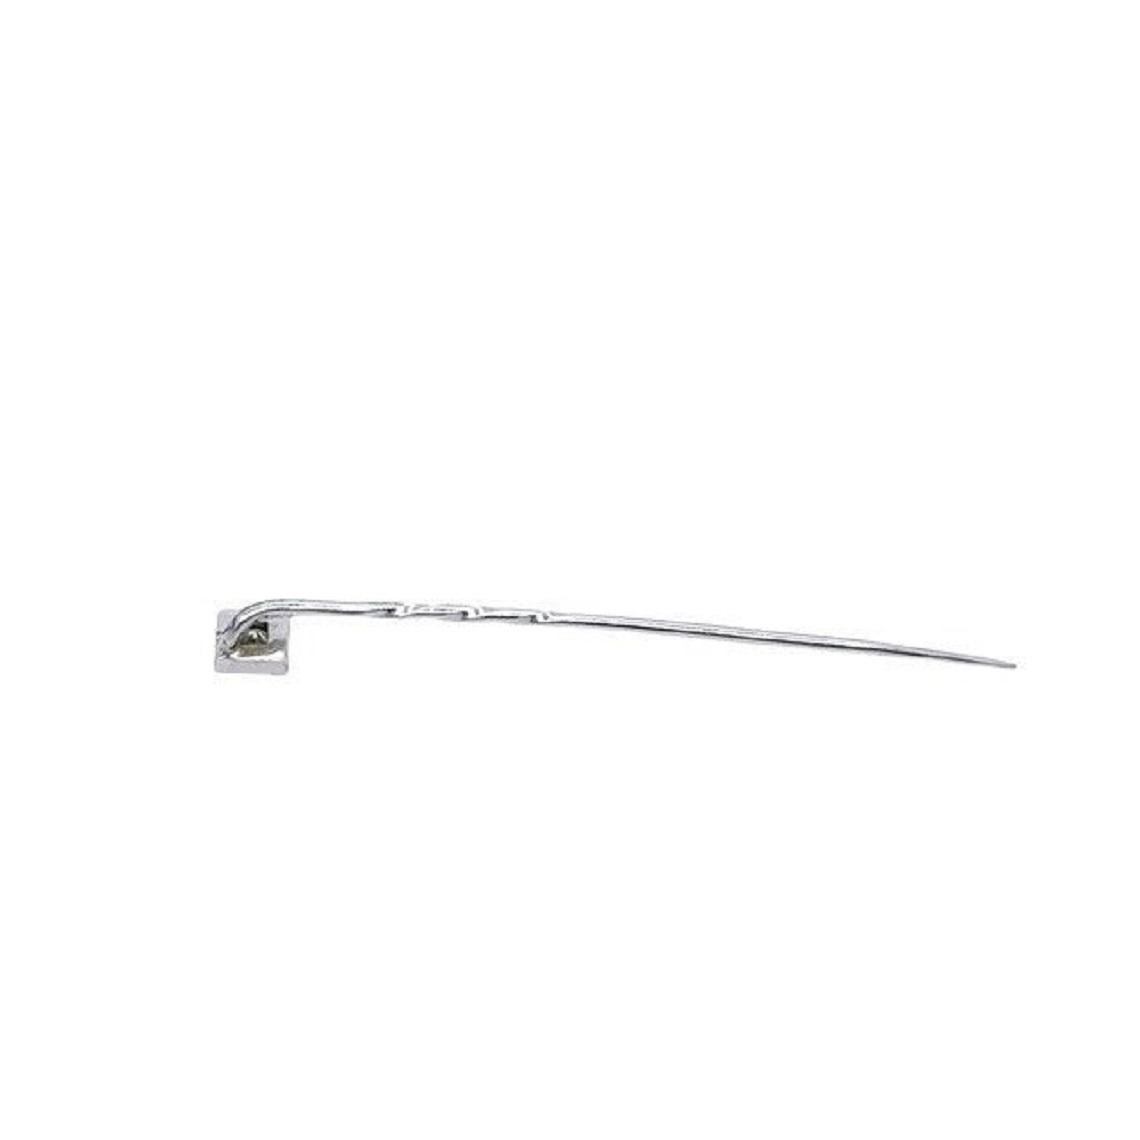 This elegant antique diamond 0.12ct stickpin in 15ct white gold setting & a 9ct gold pin is the perfect gift for your loved one. It's a timeless piece that can be kept in your wardrobe and worn on special occasions.

Additional Information:
Total 